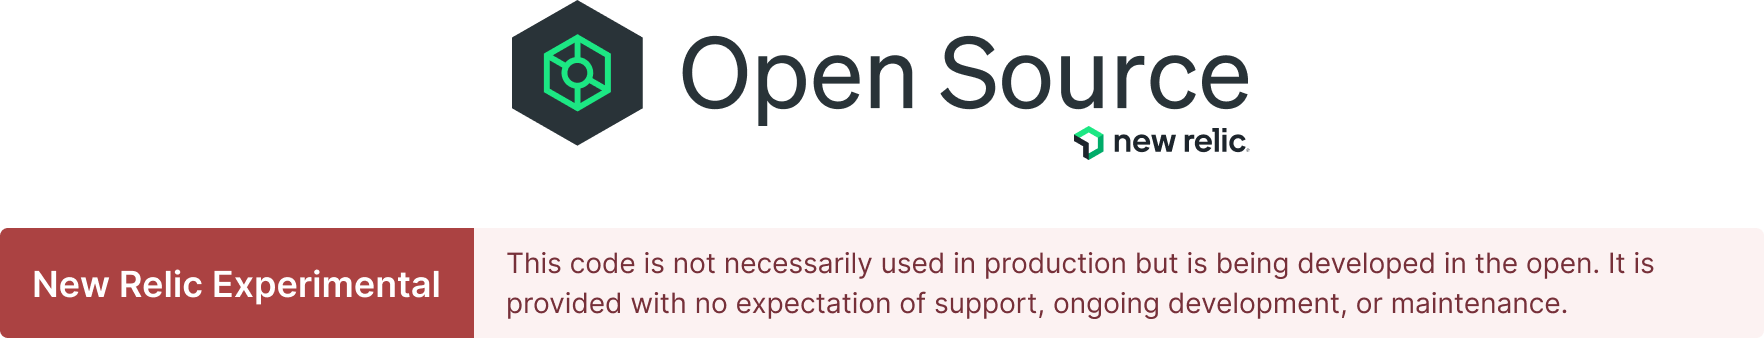 New Relic open source - Experimental